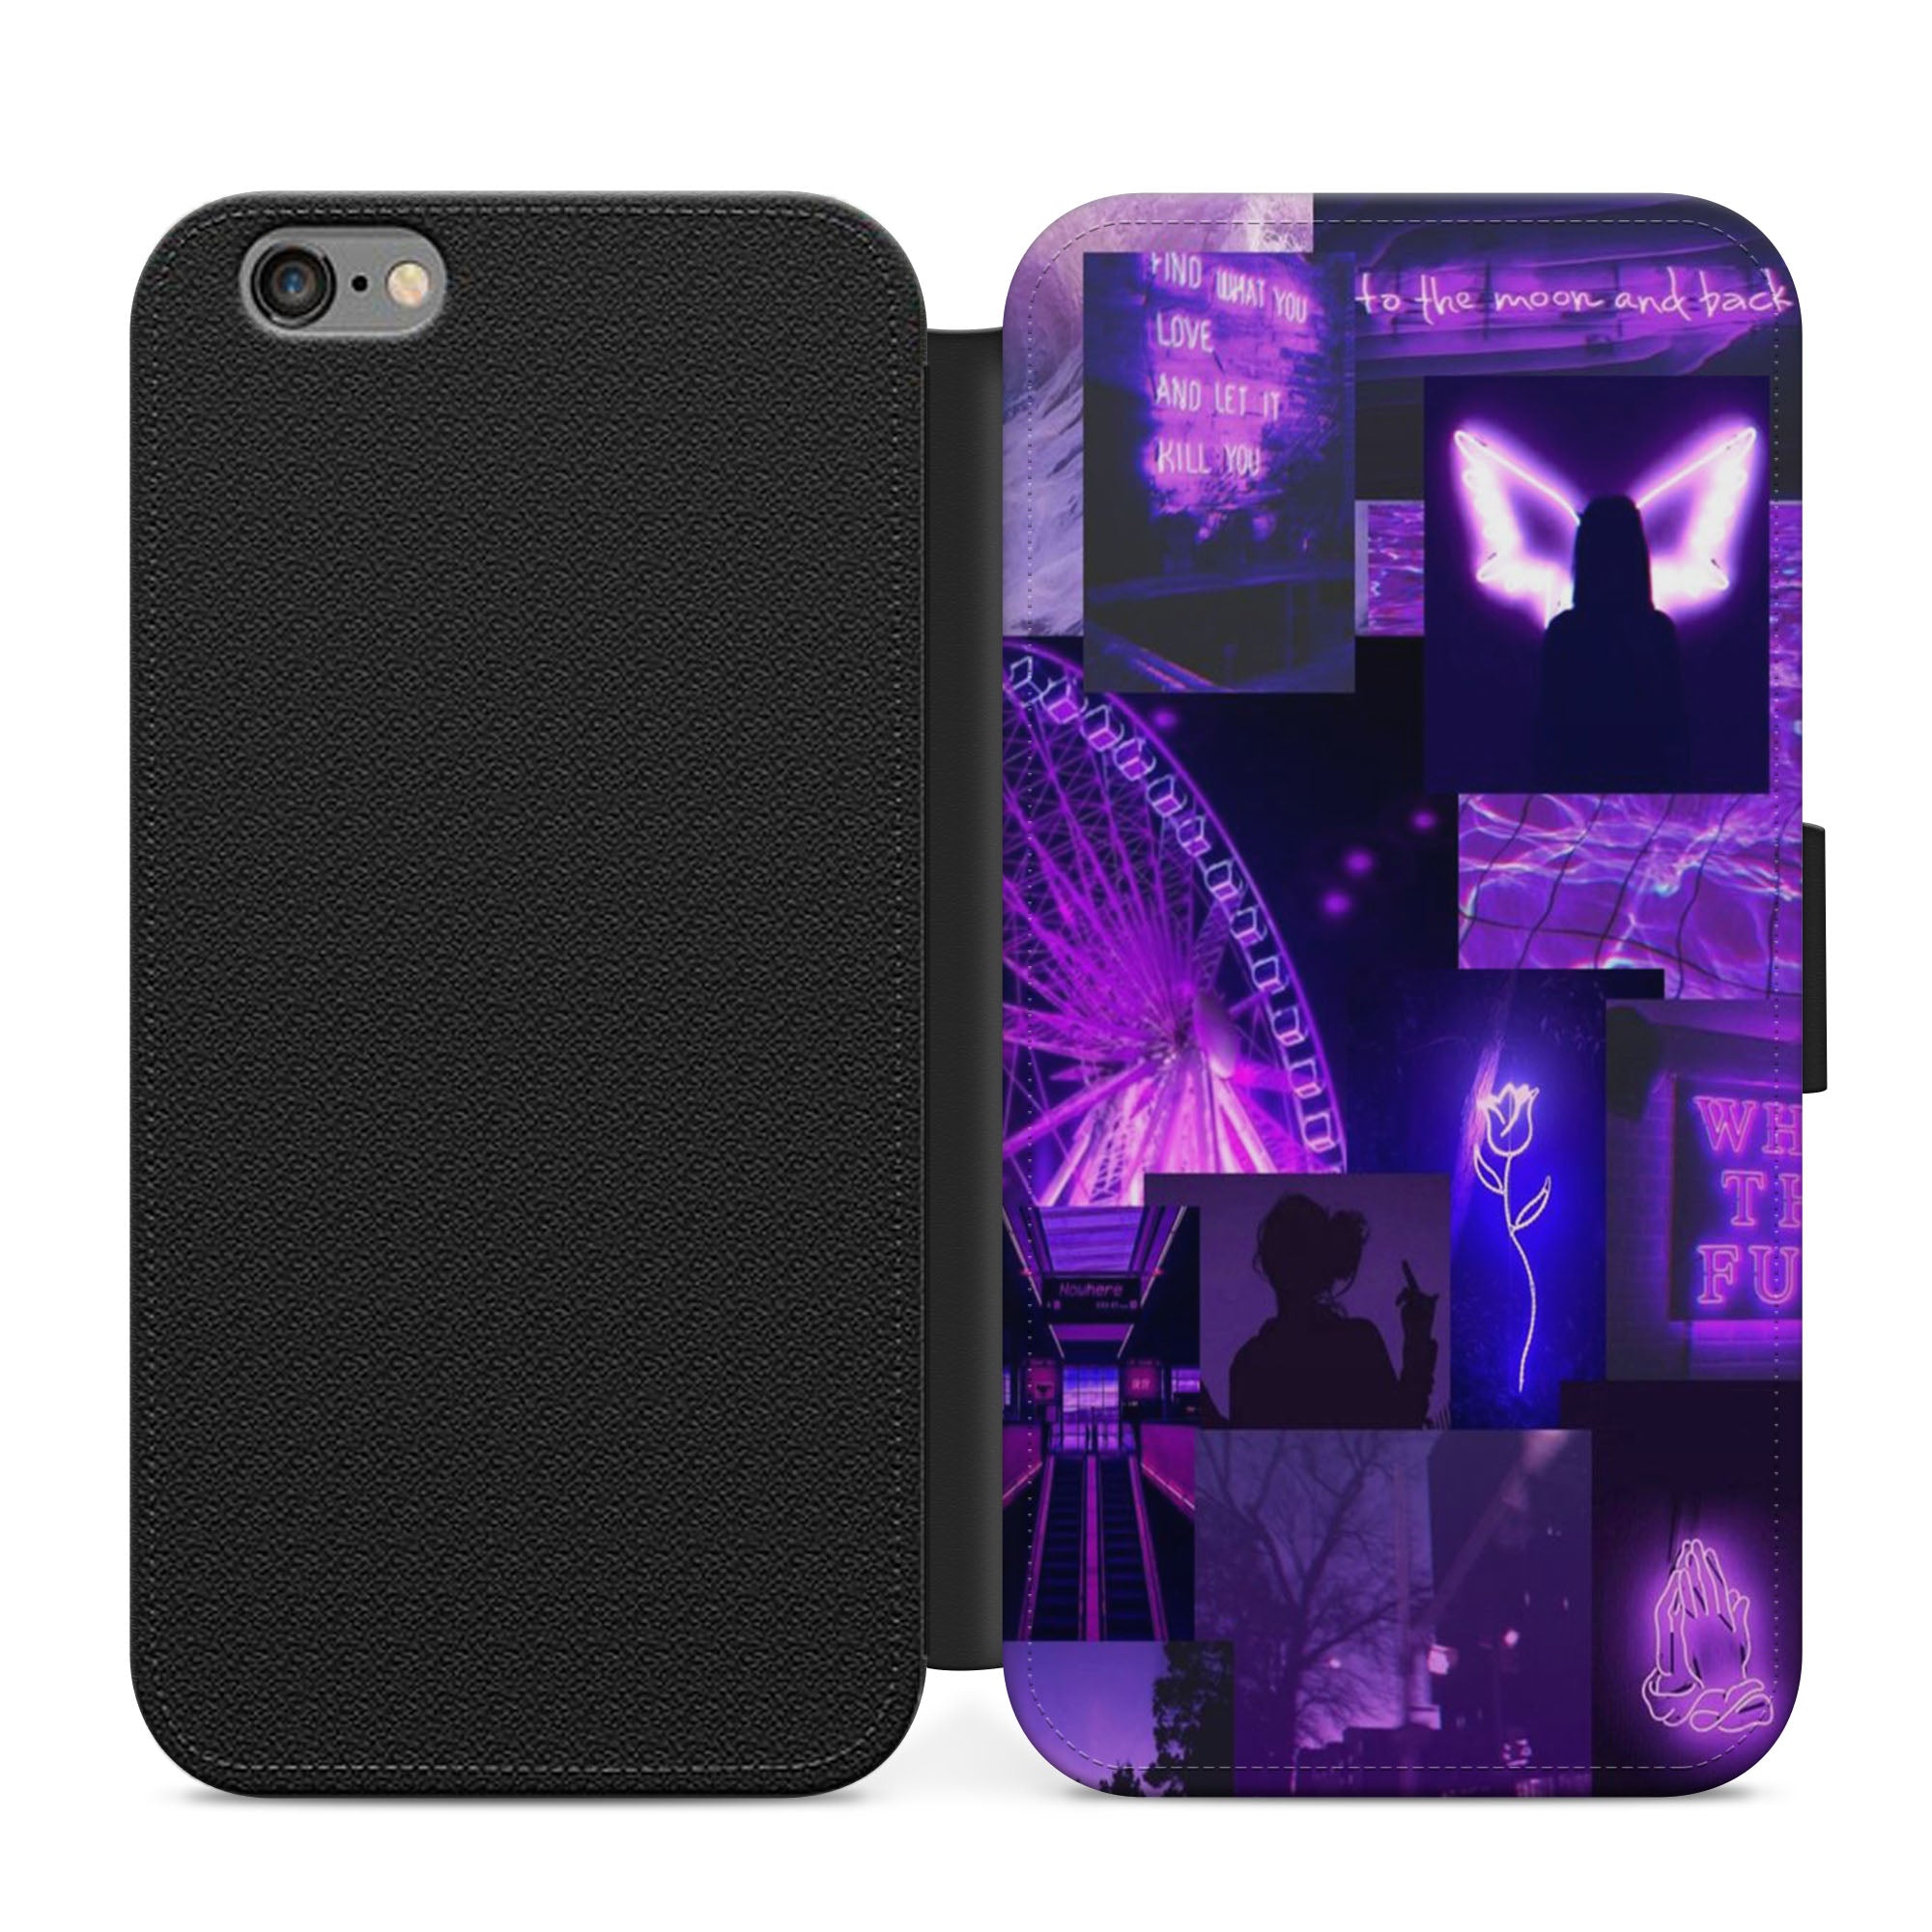 Aesthetic Purple Collage Faux Leather Flip Case Wallet for iPhone / Samsung